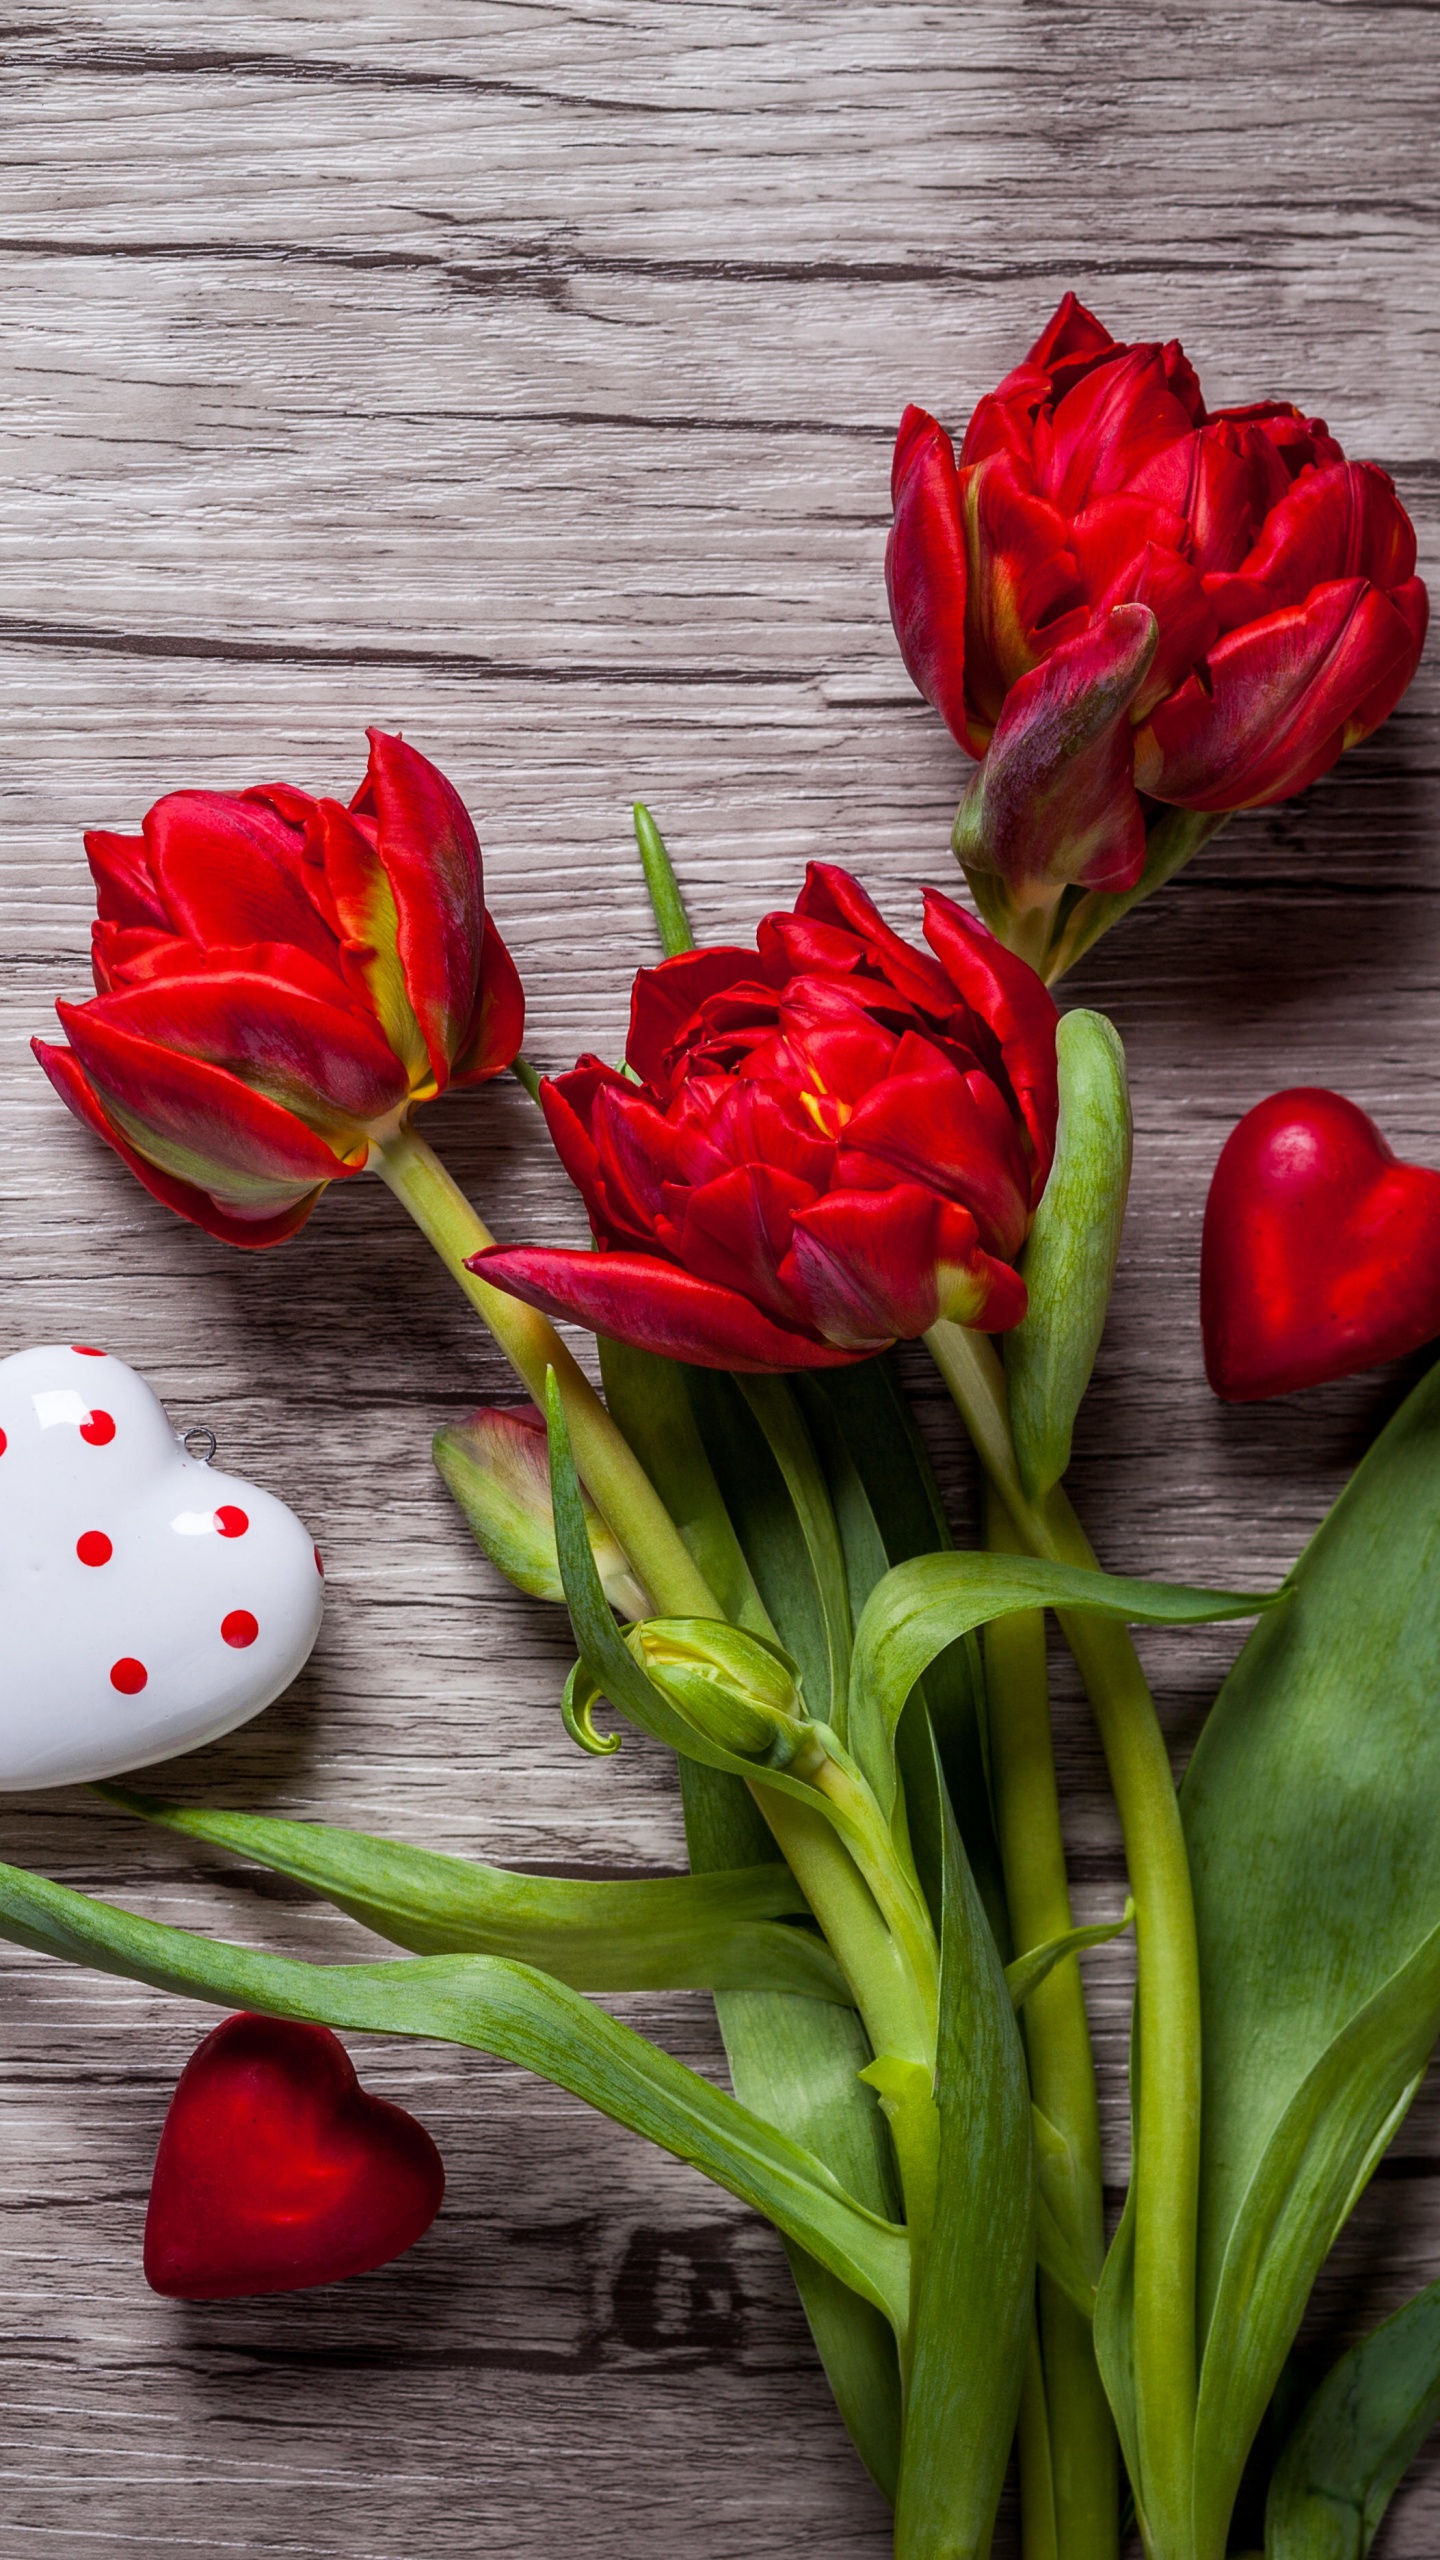 Red Tulips on Gray Wooden Surface. Wallpaper in 1440x2560 Resolution